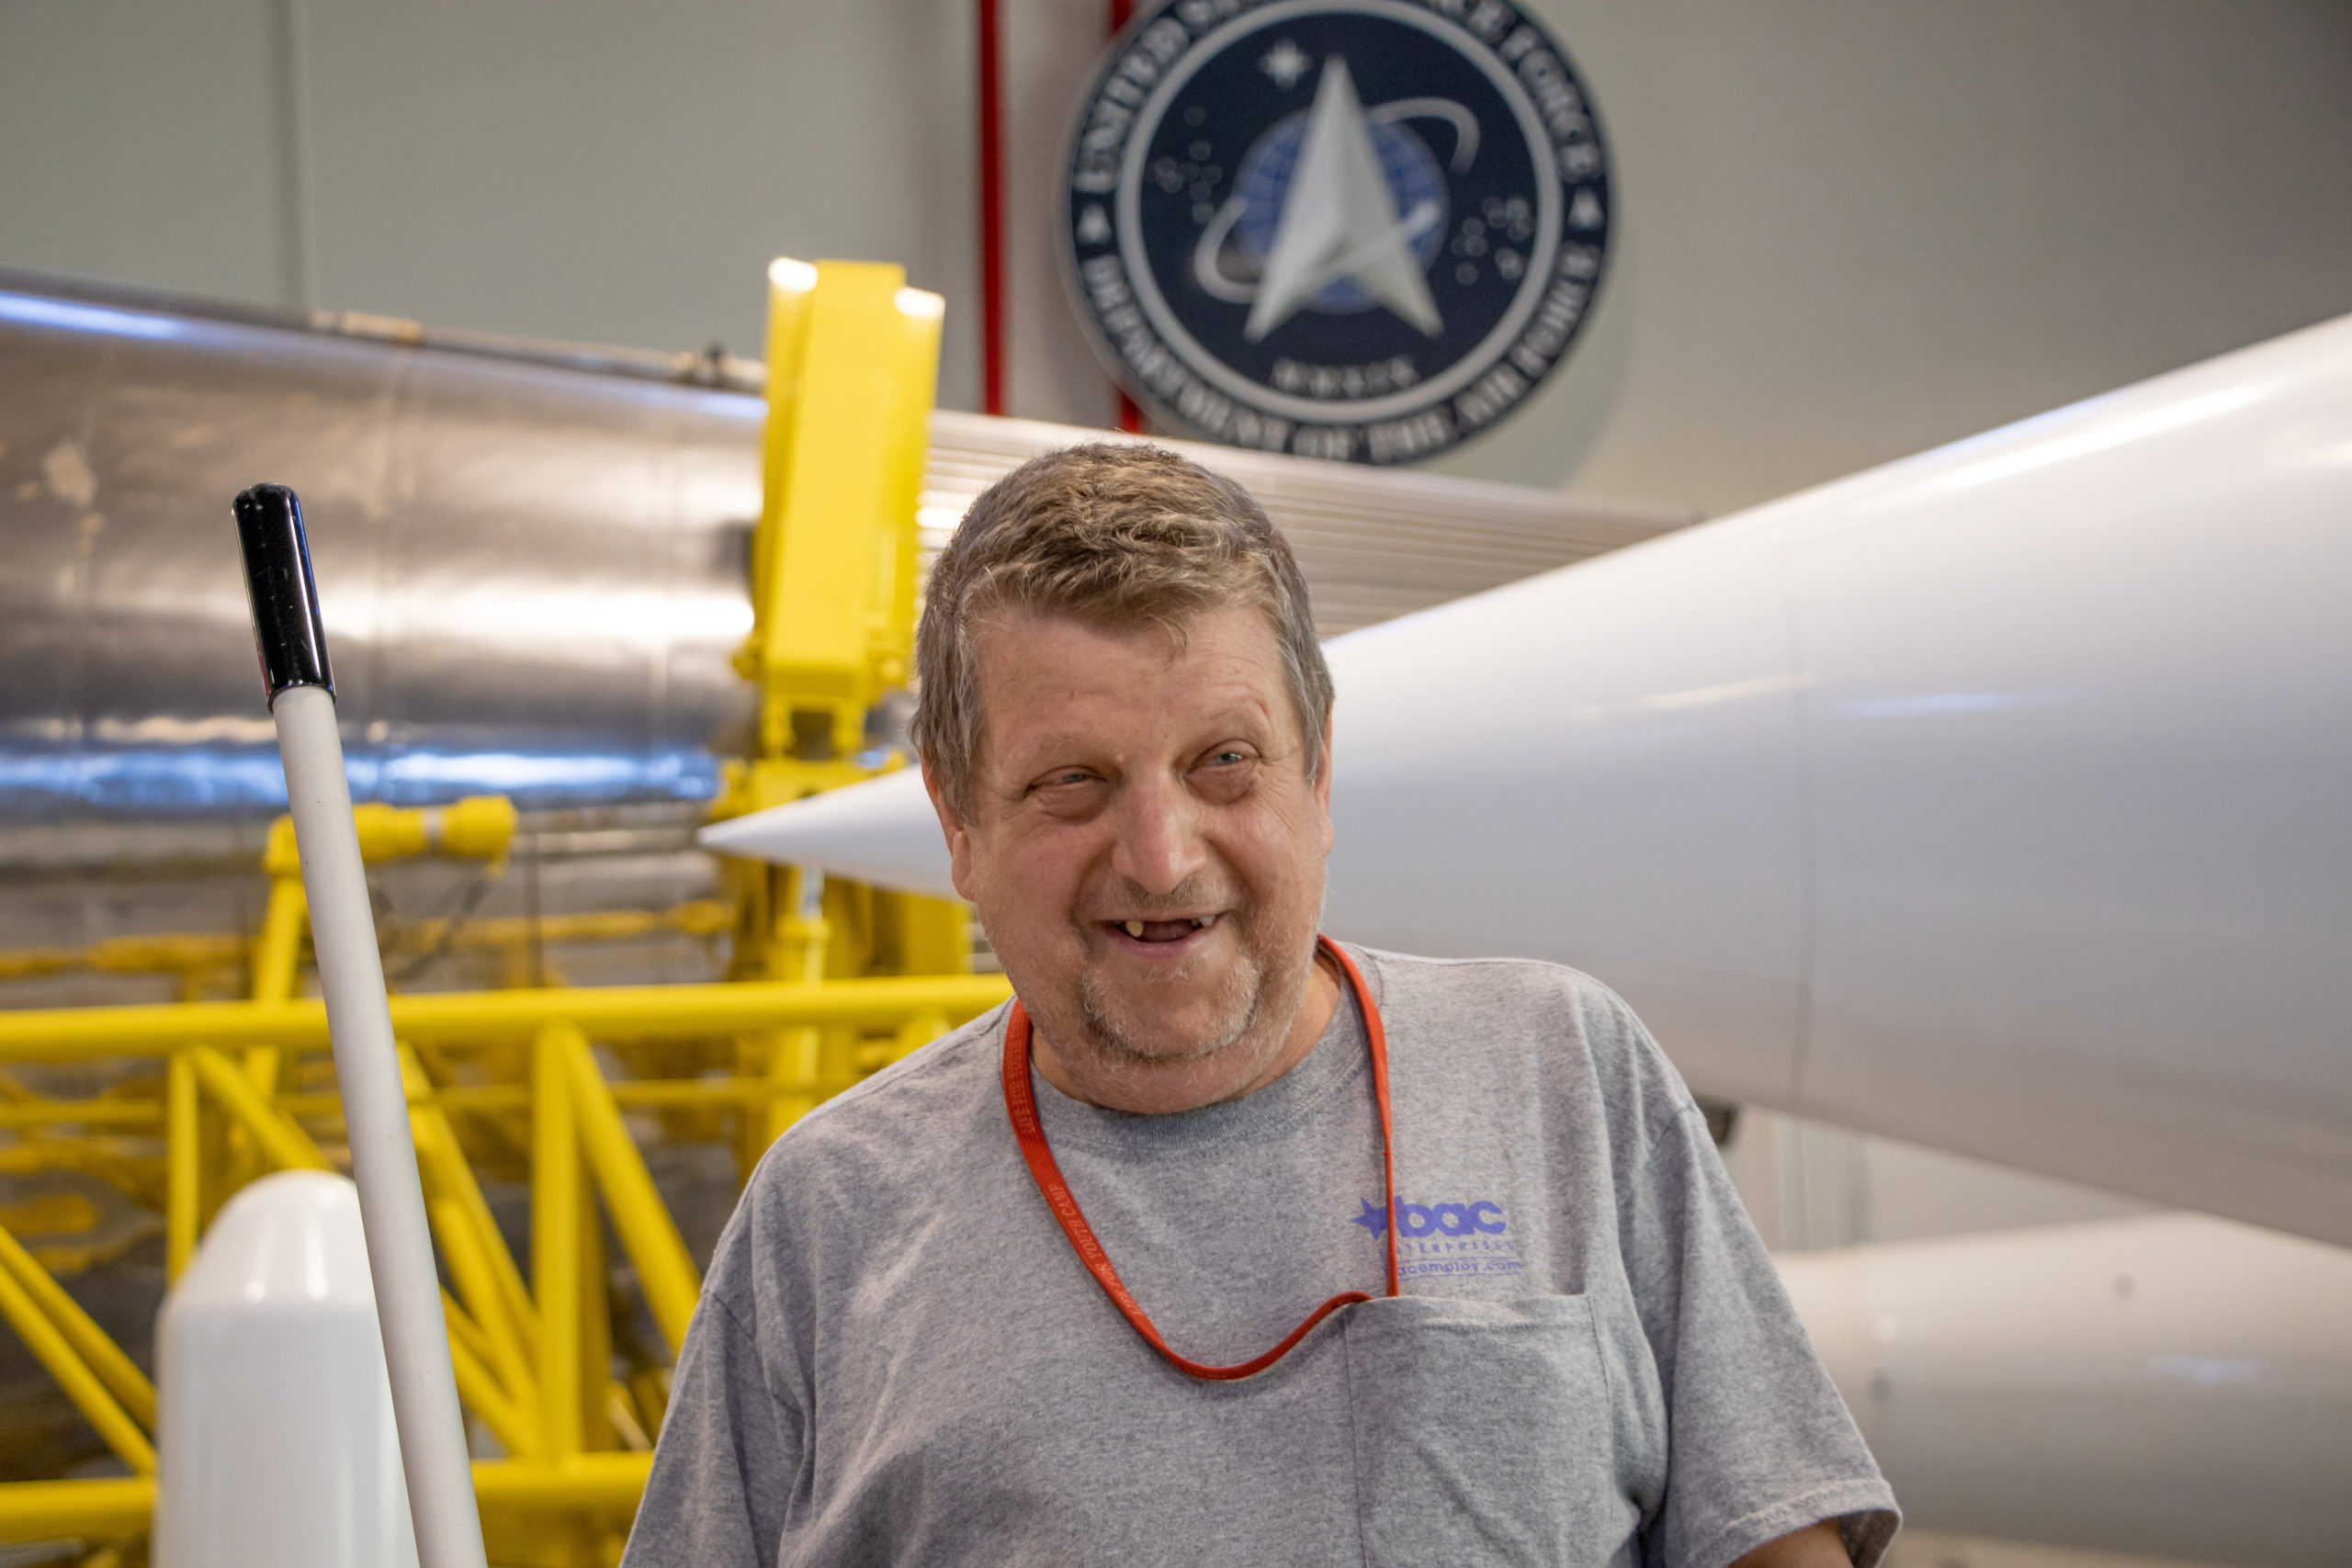 Custodian, James Fox, standing with Space Force Base Seal behind him